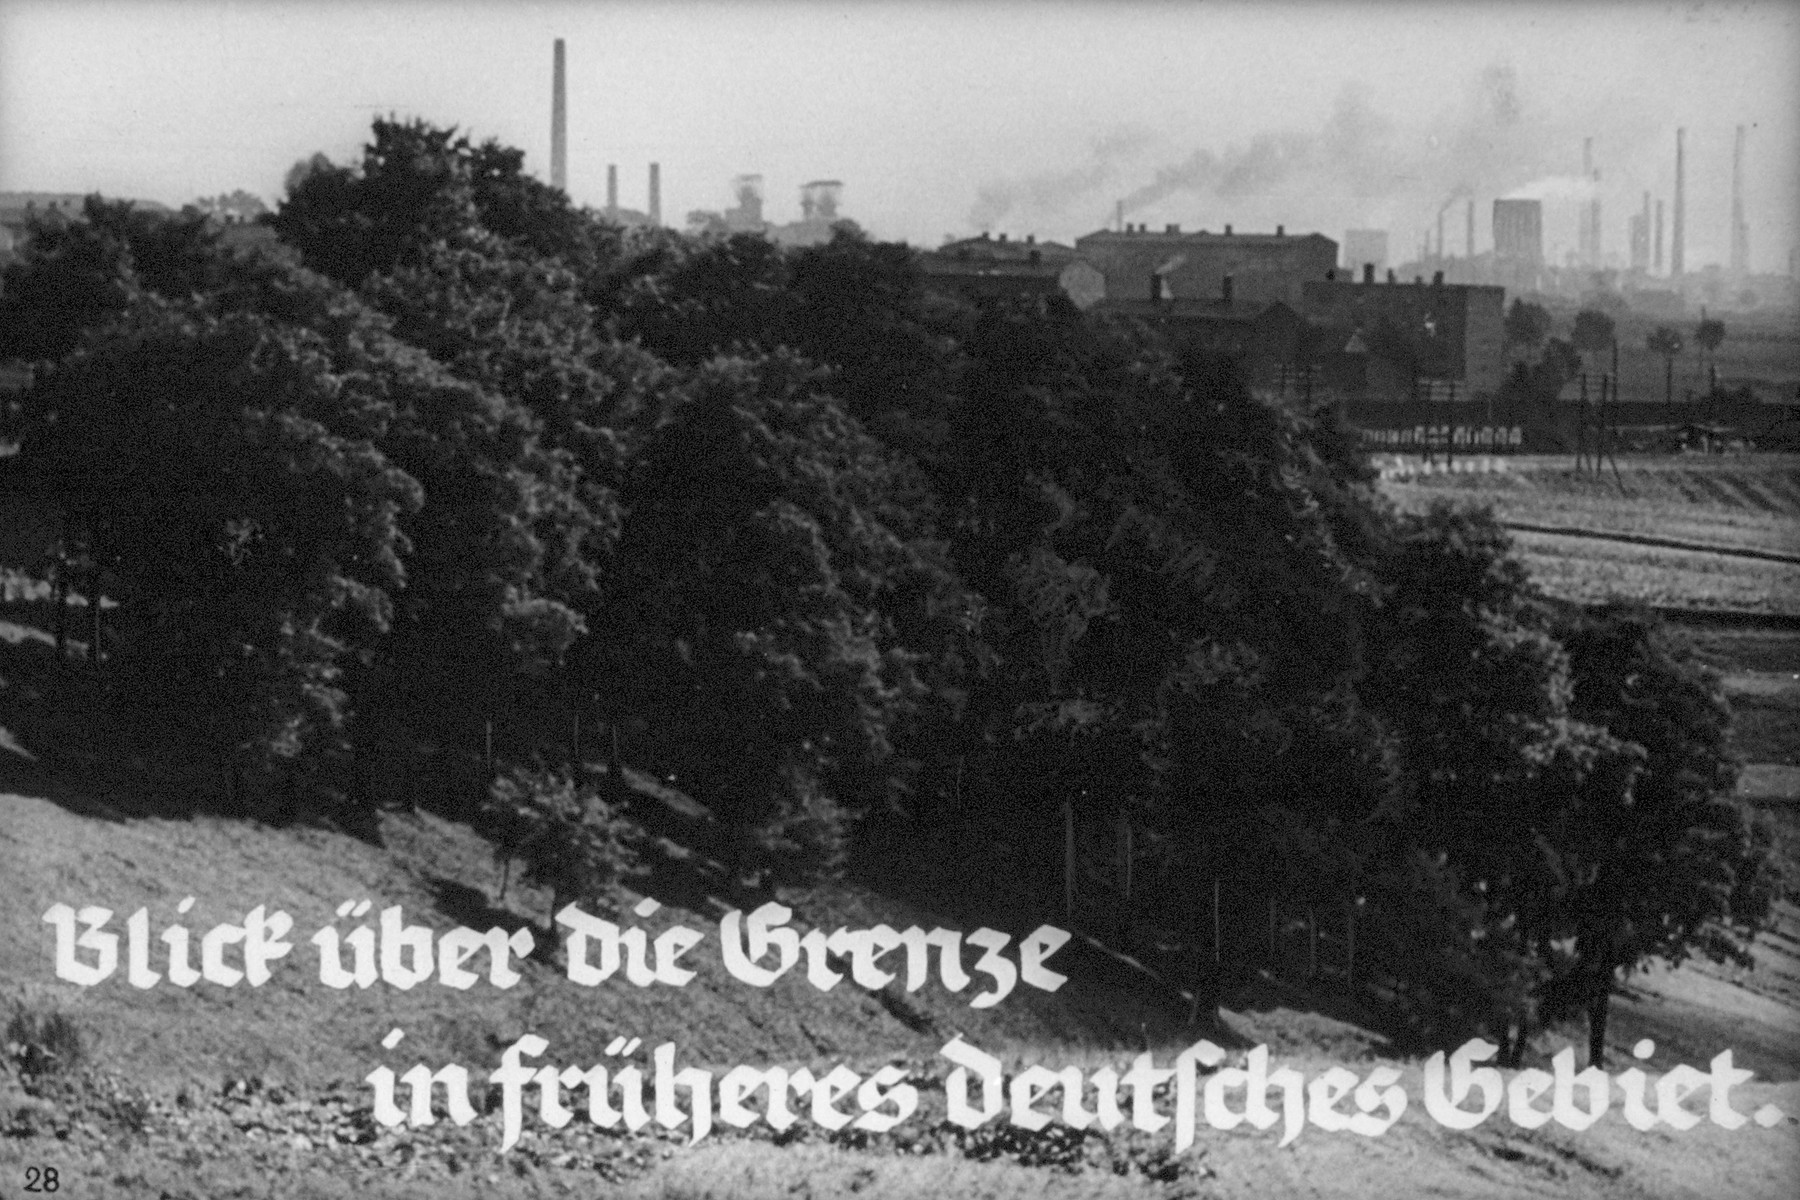 29th Nazi propaganda slide from Hitler Youth educational material titled "Border Land Upper Silesia."

Blick über die Grenze in früheres deutschs Gebiet.
//
Look across the border to early German territory.